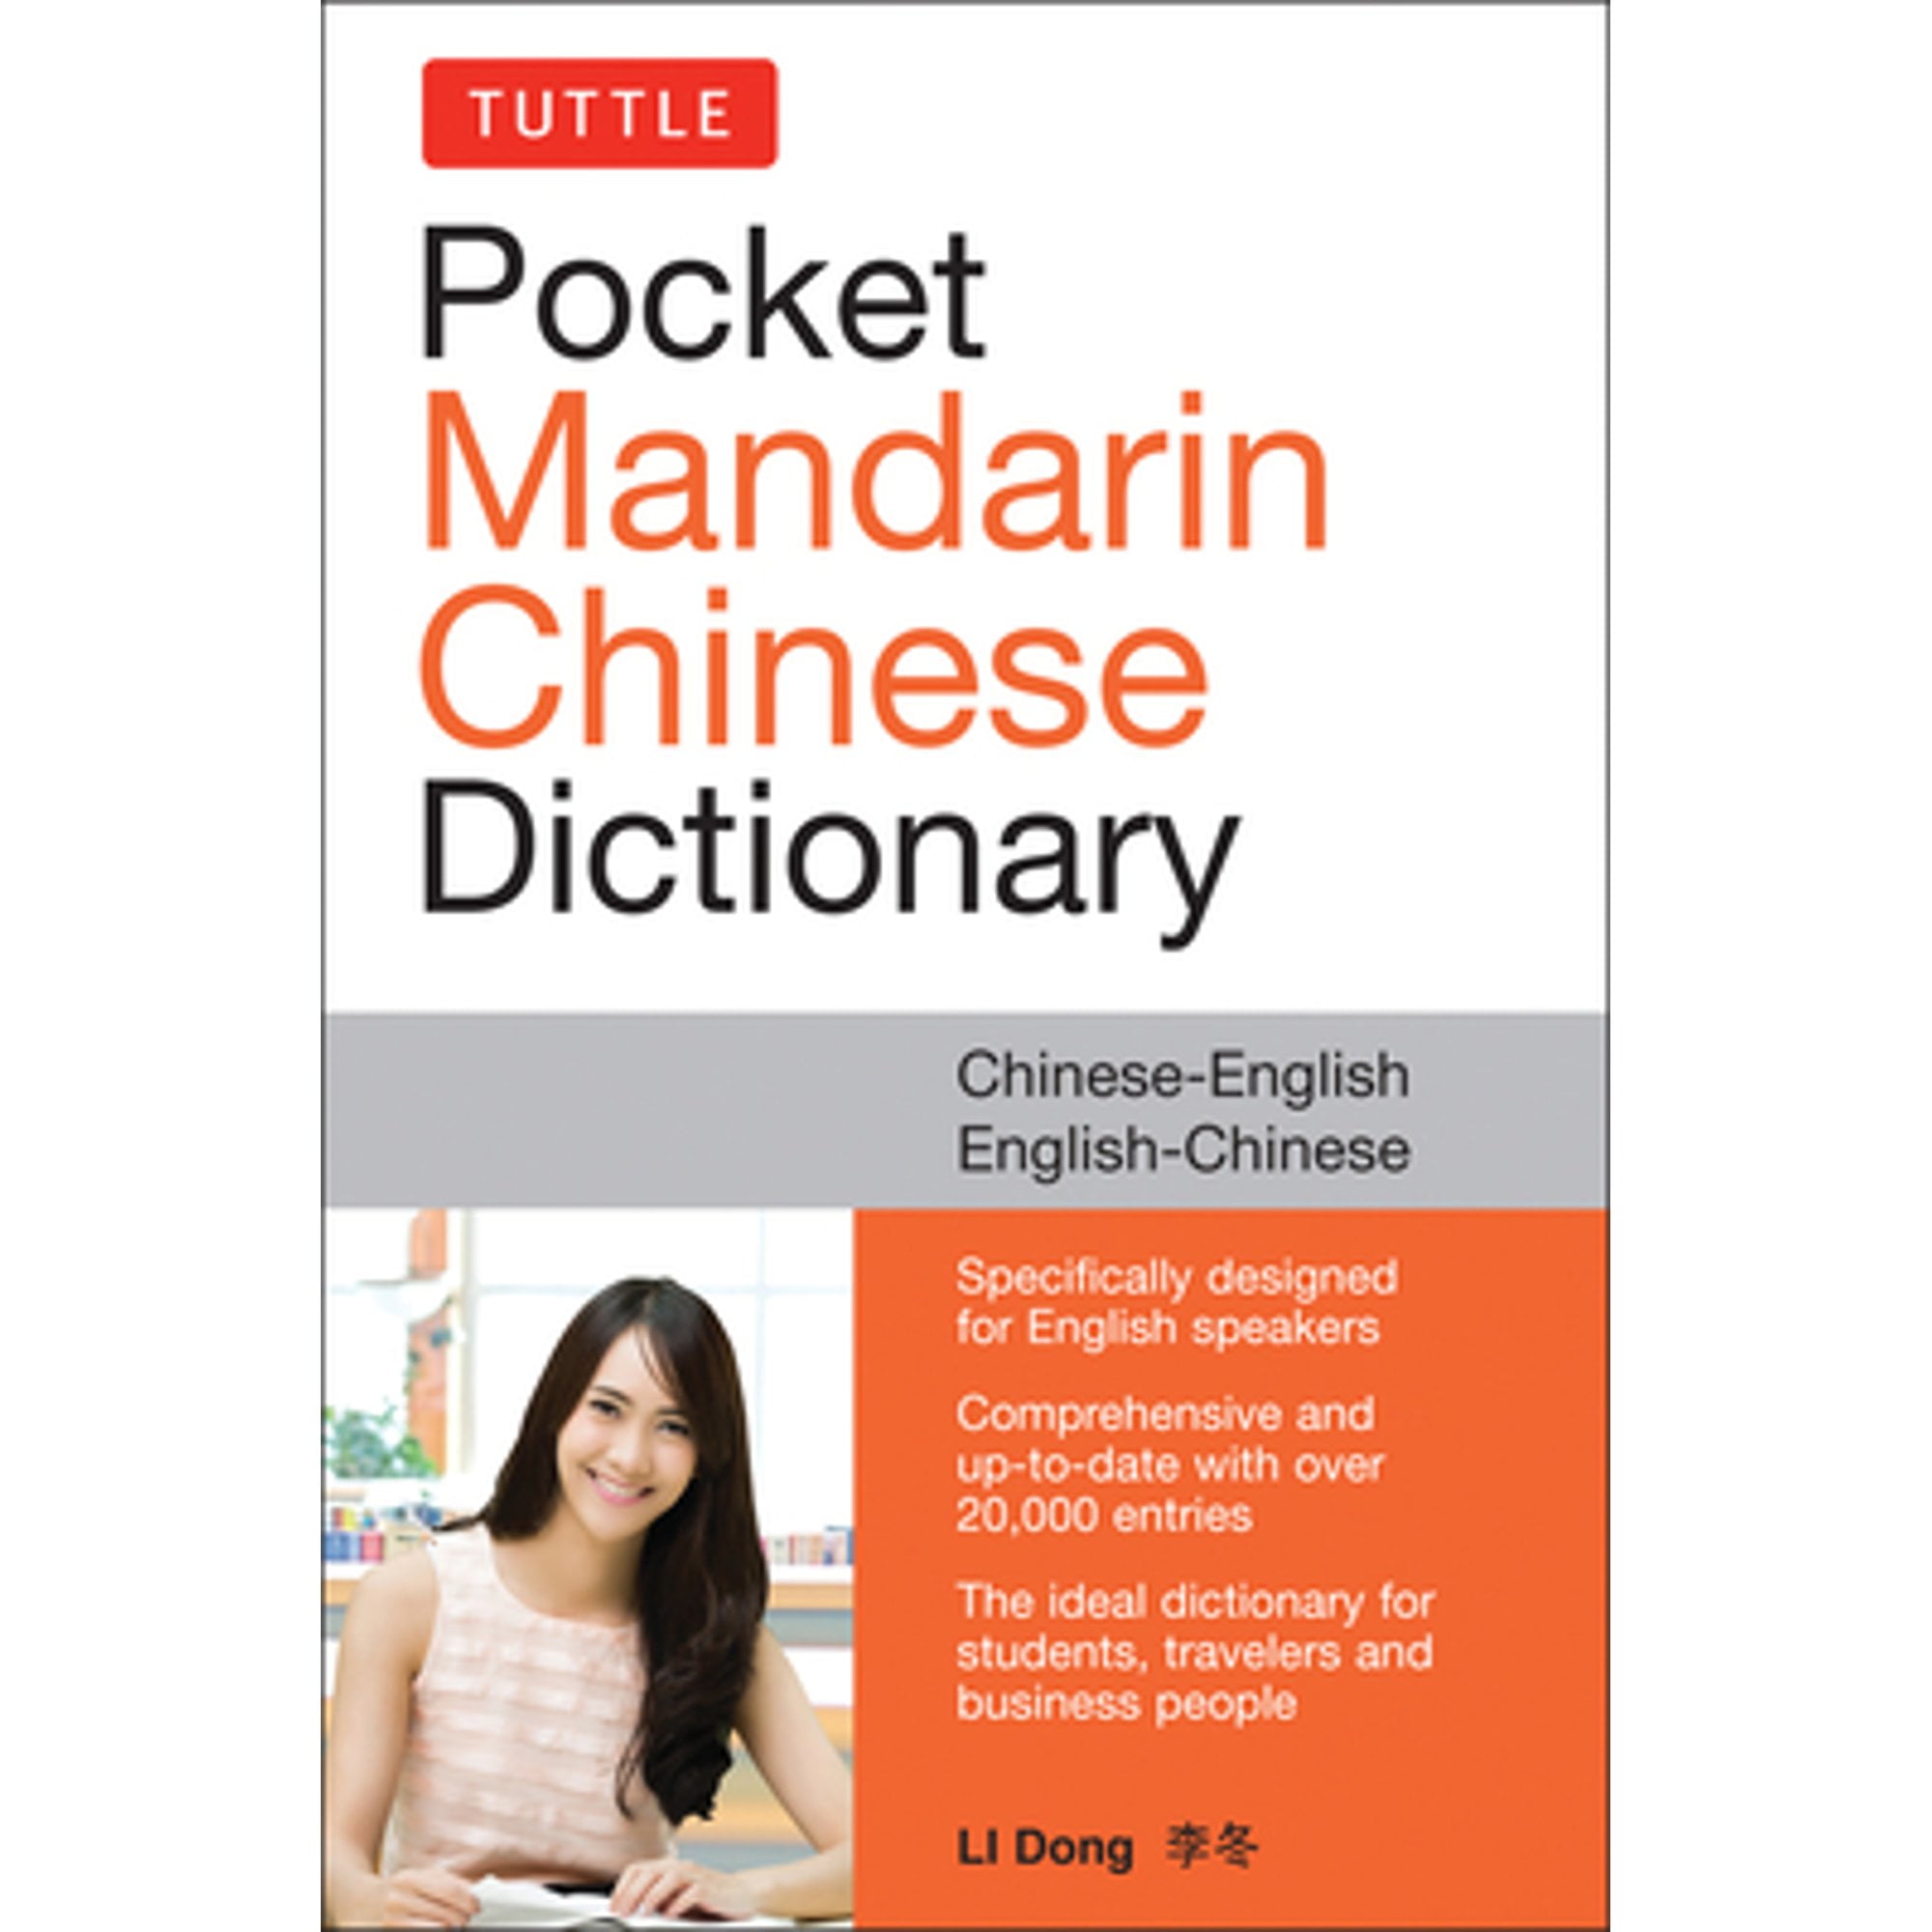 Pre-Owned Tuttle Pocket Mandarin Chinese Dictionary: English-Chinese Chinese-English (Paperback 9780804848459) by Li Dong